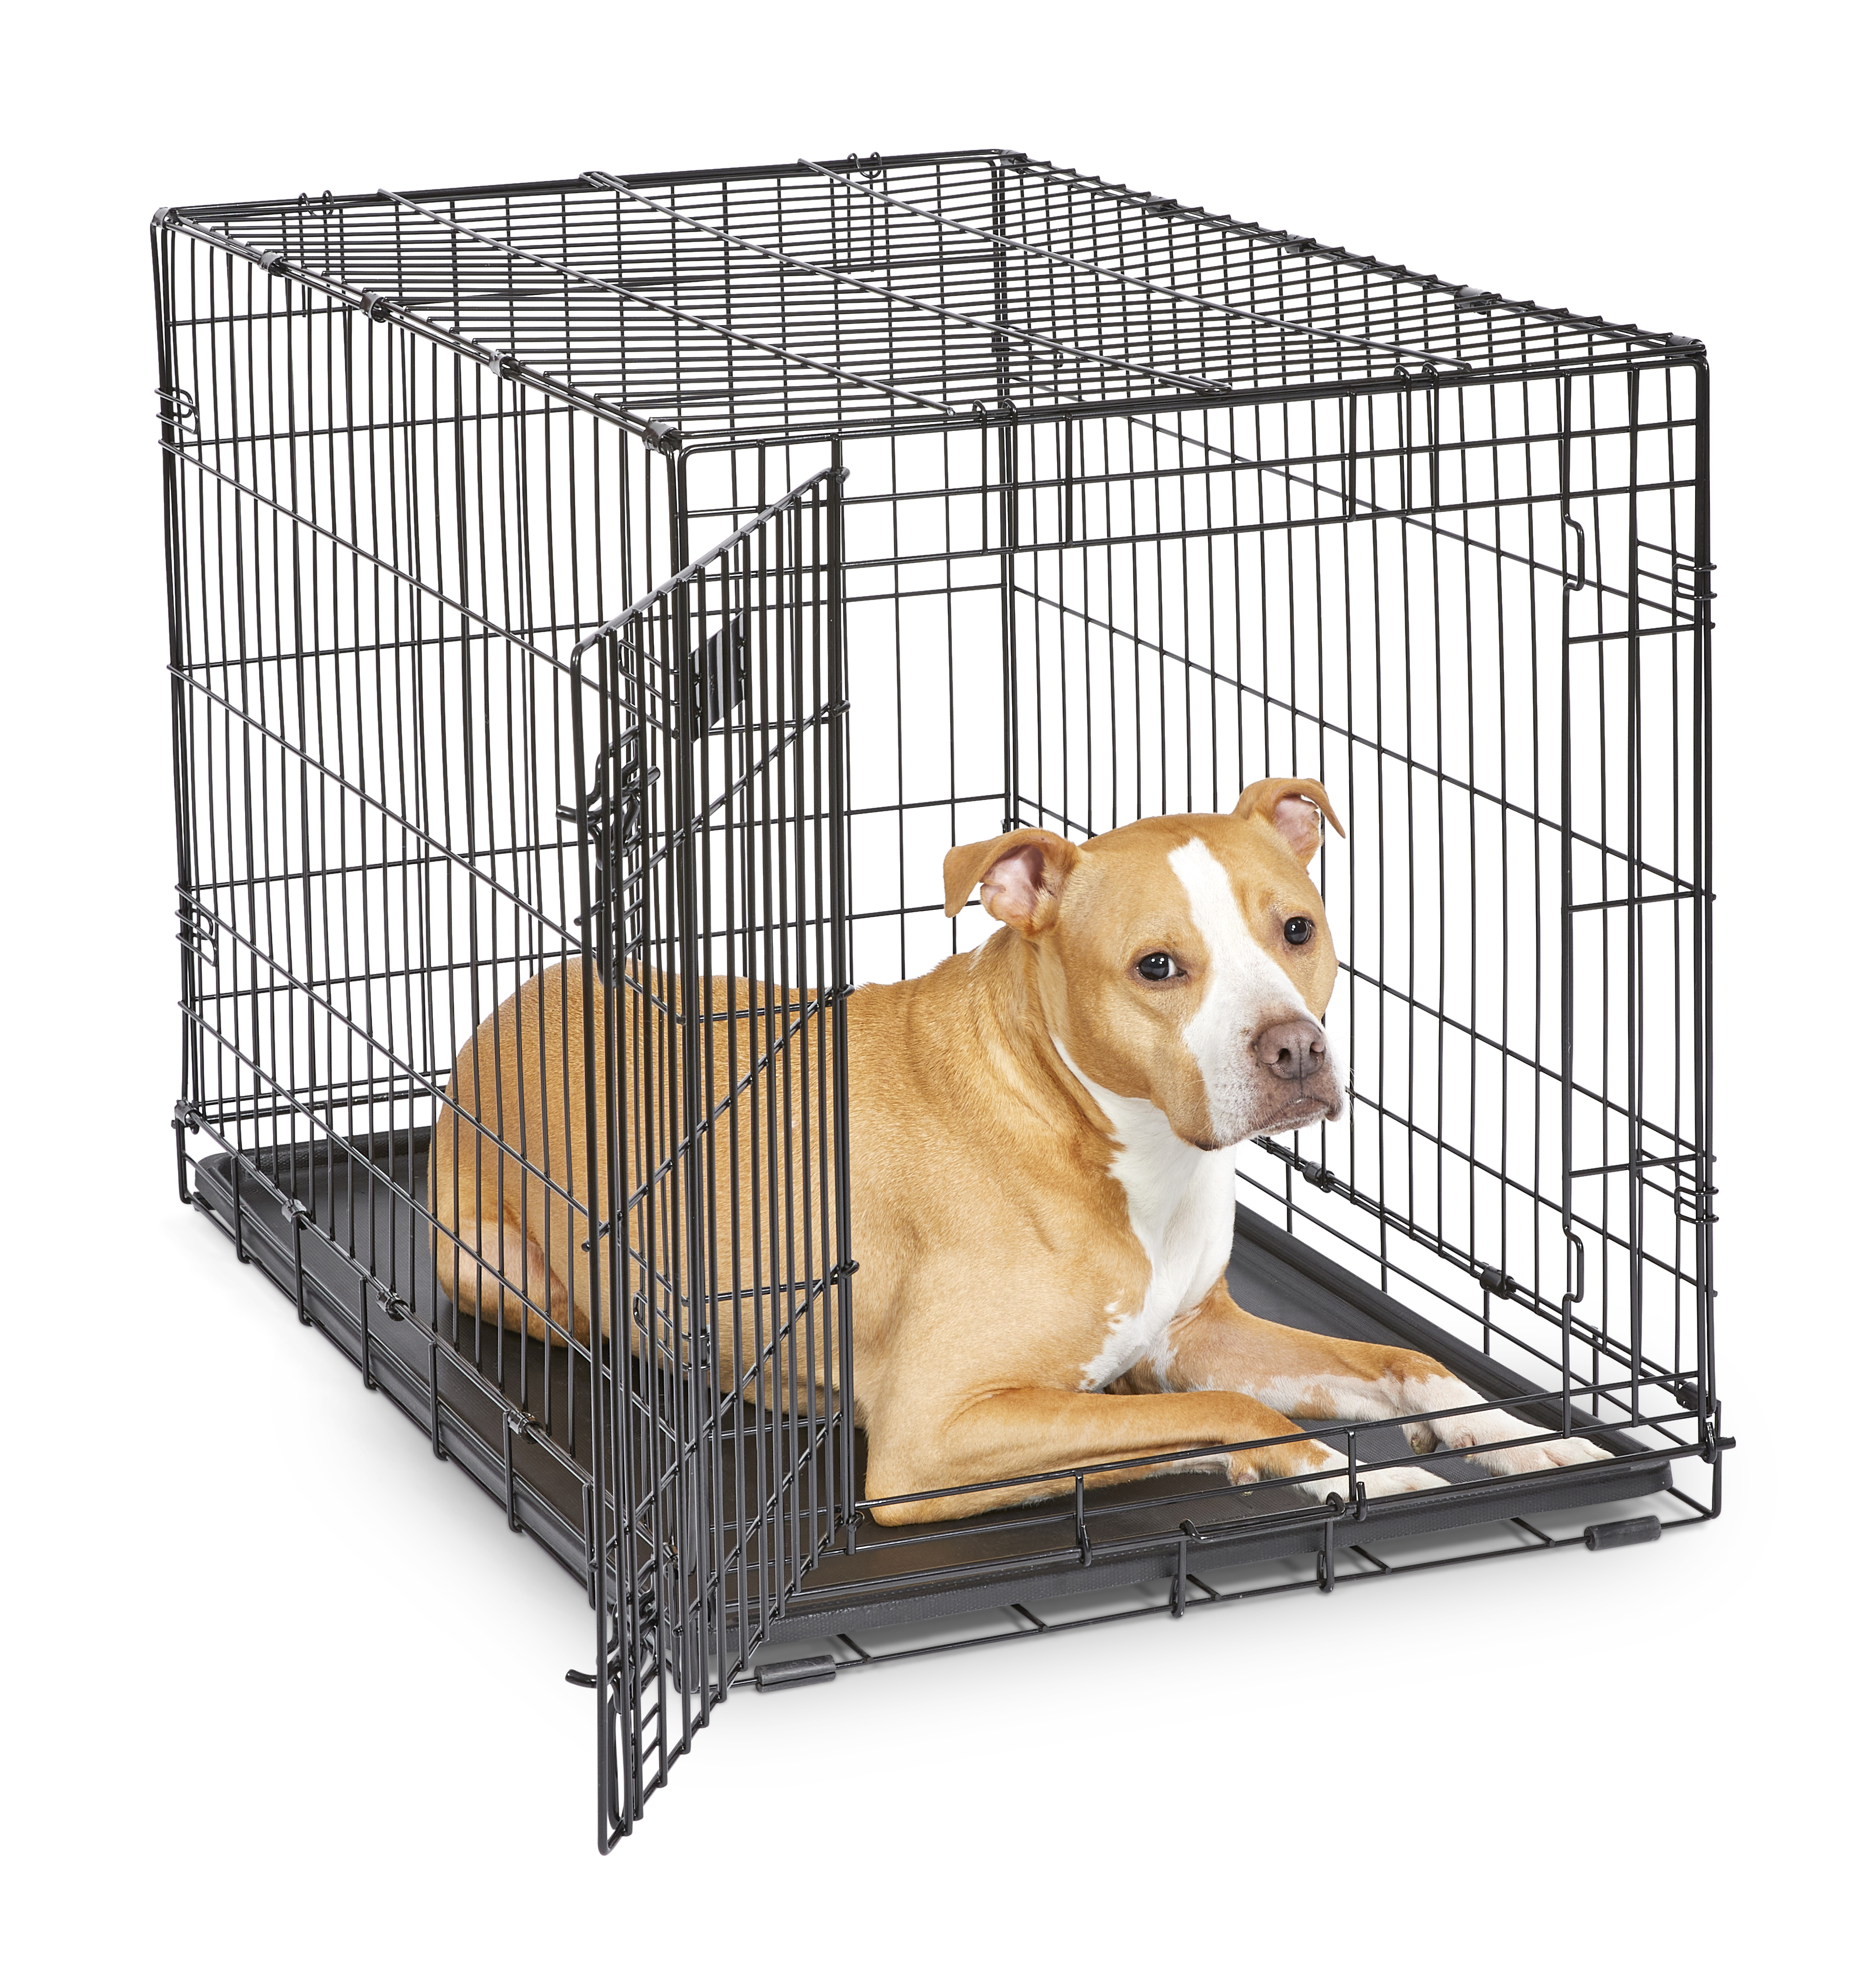 MidWest Homes for Pets Newly Enhanced Single Door iCrate Dog Crate, Includes Leak-Proof Pan, Floor Protecting Feet, Divider Panel & New Patented, 36 Inch - image 3 of 9